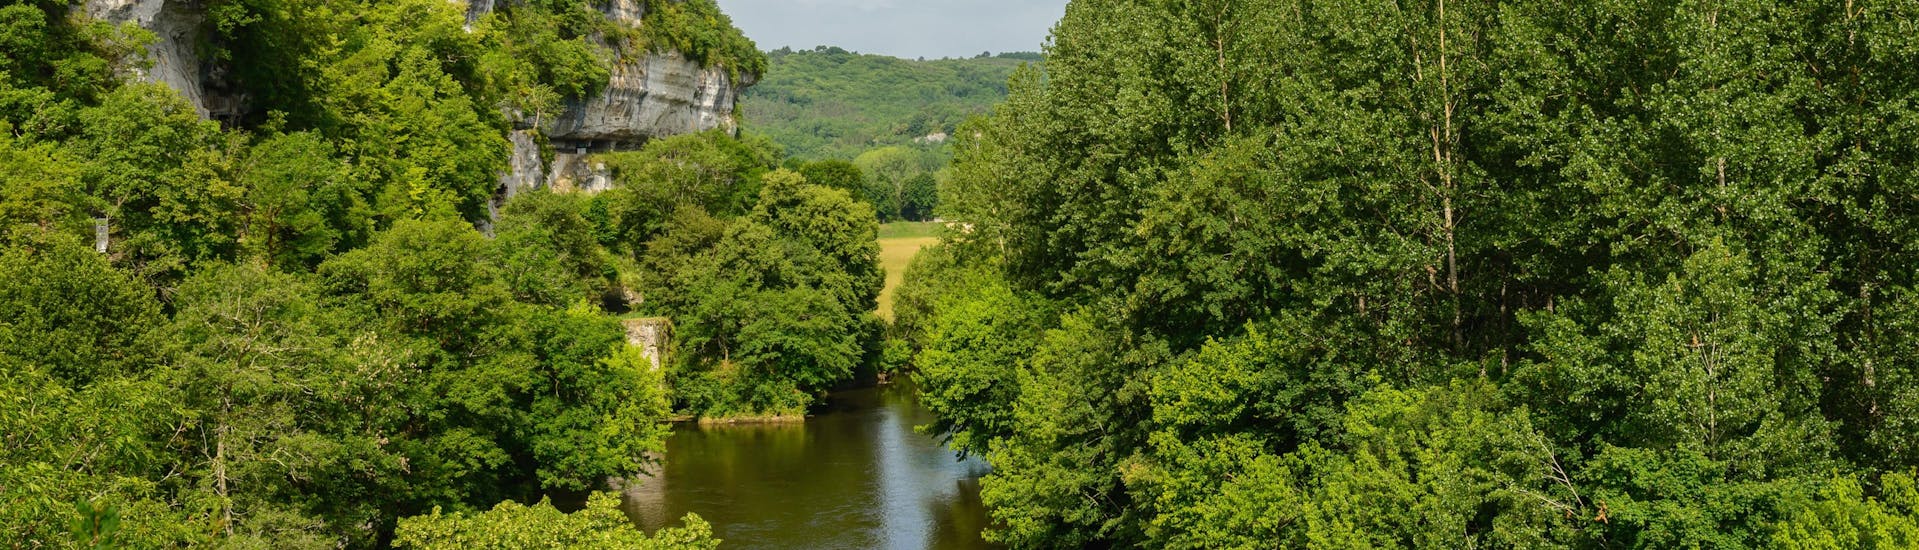 View of the wild Vézère valley in the Dordogne region where tourists enjoy canoeing.